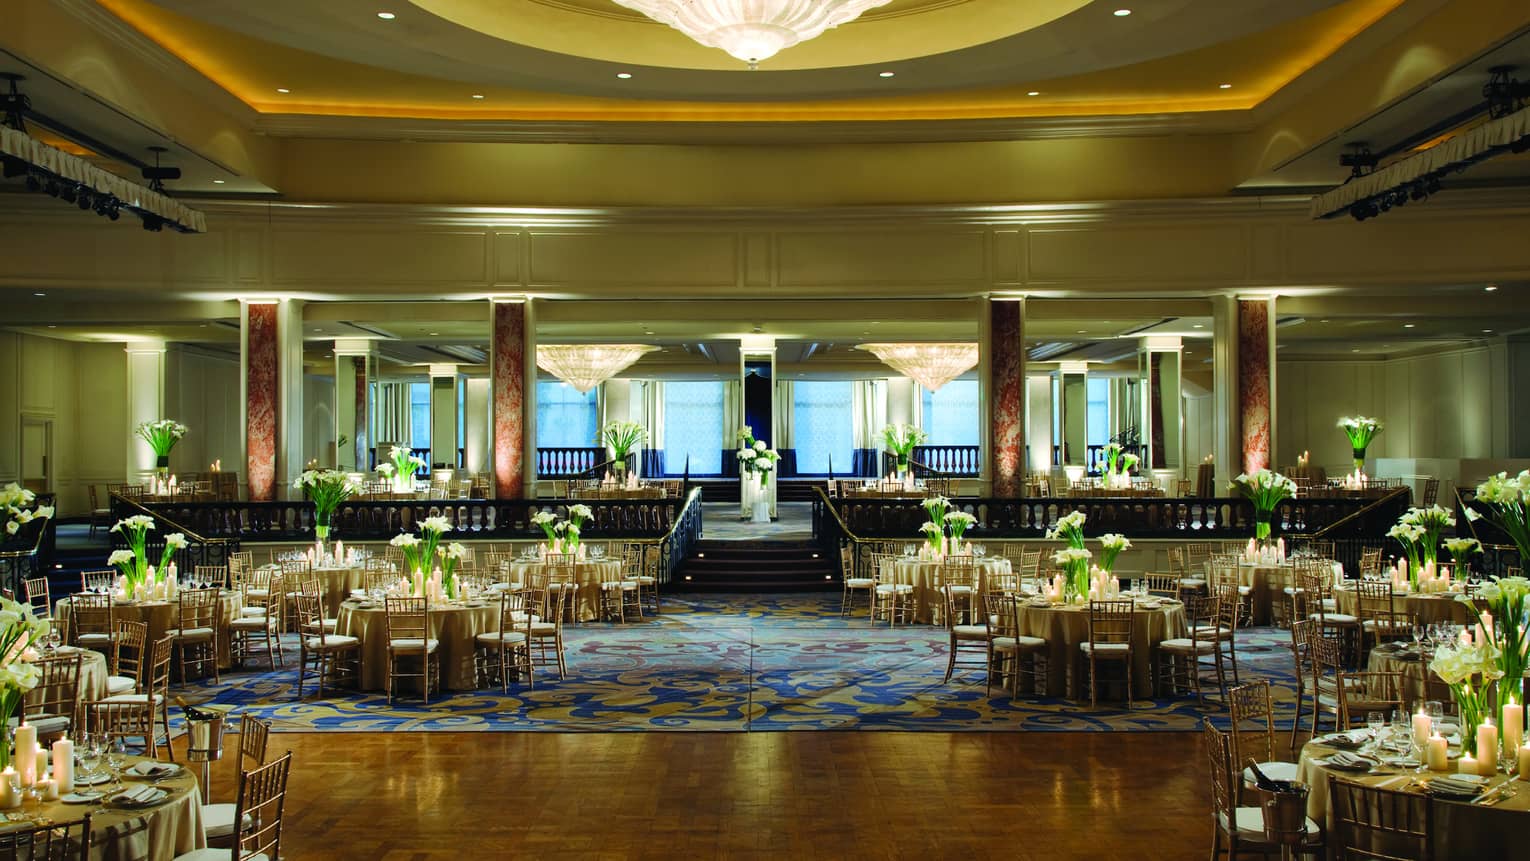 Ballroom dance floor under large cone-shaped crystal chandelier, round banquet tables